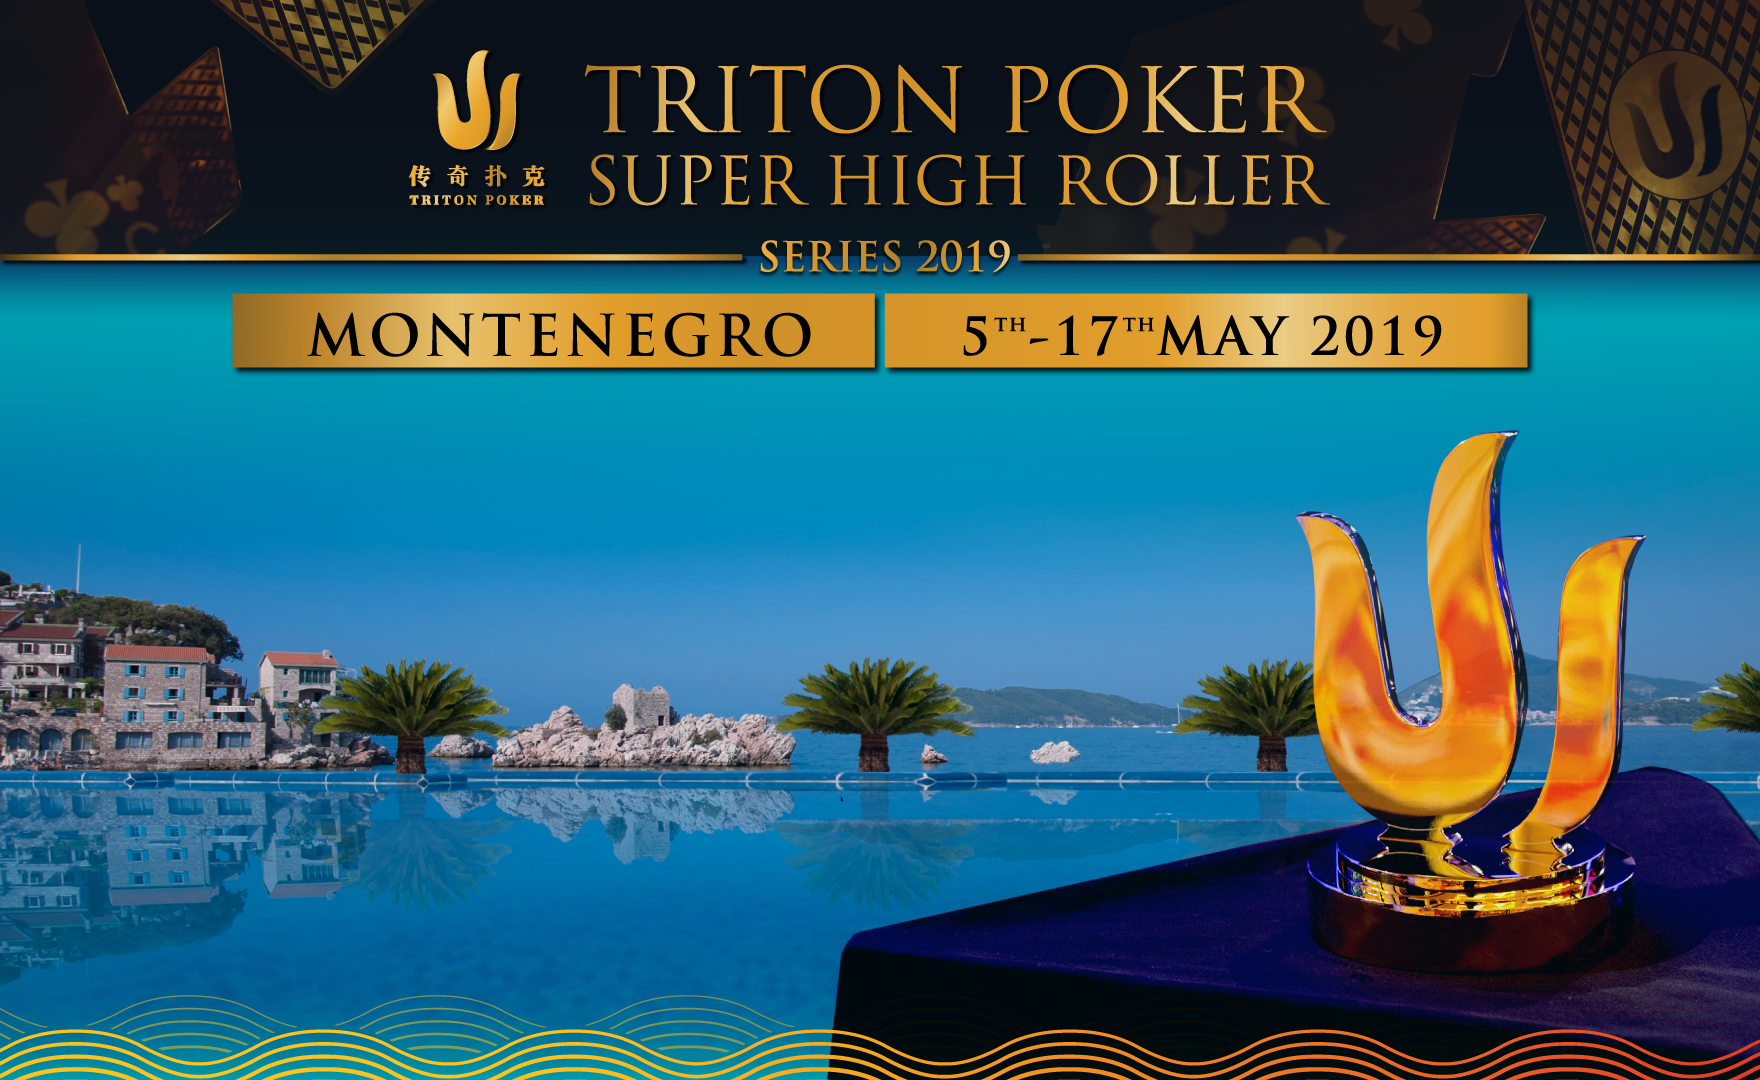 Steve O'Dwyer and Bryn Kenney Emerged Victorious at Triton Poker Montenegro